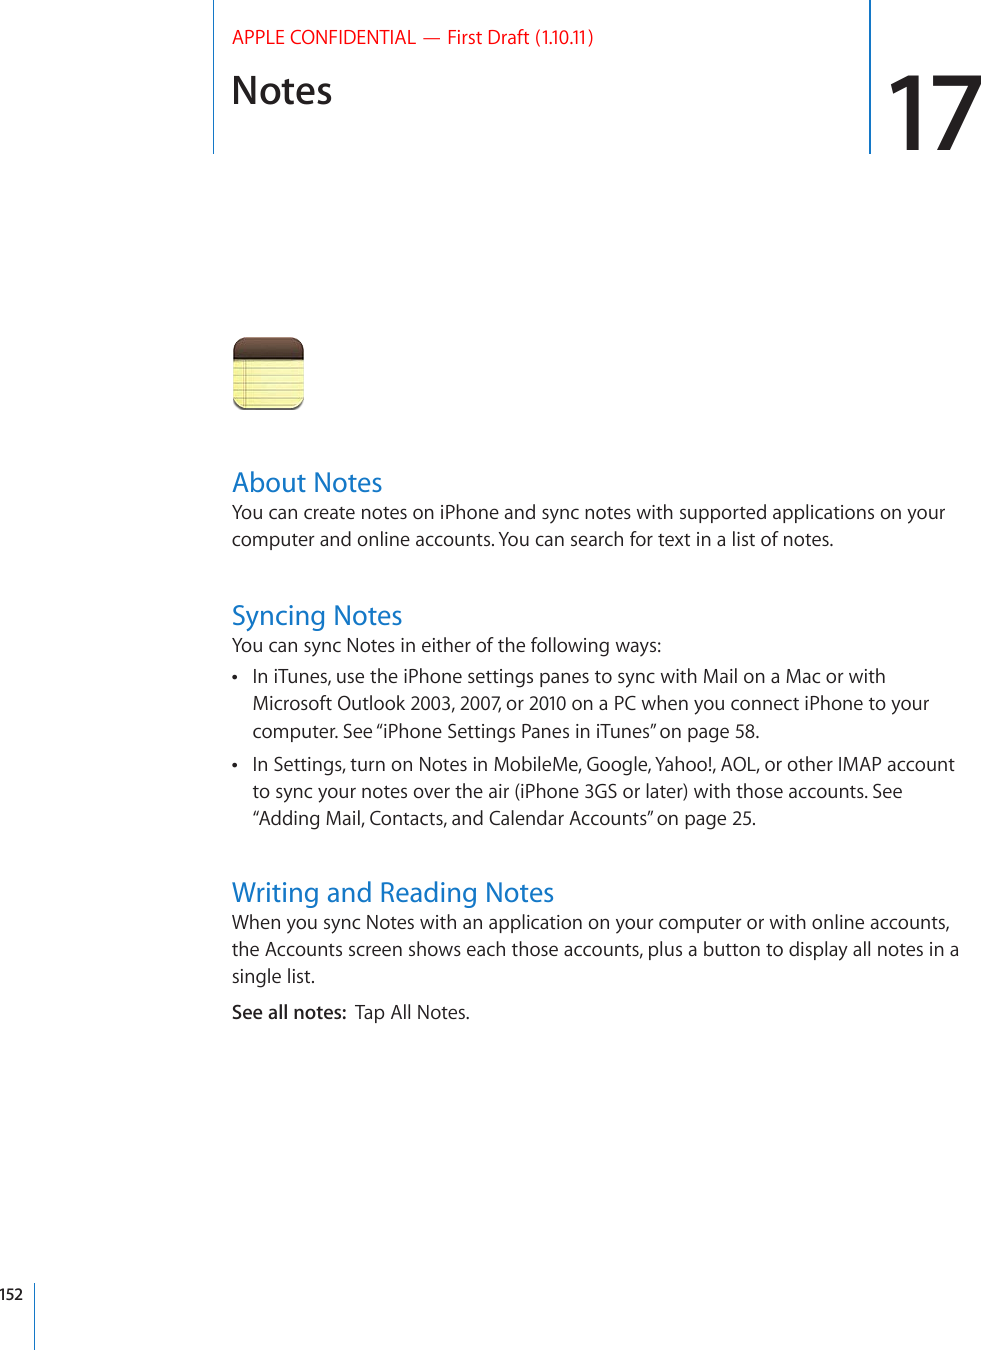 Notes 17APPLE CONFIDENTIAL — First Draft (1.10.11)About NotesYou can create notes on iPhone and sync notes with supported applications on your computer and online accounts. You can search for text in a list of notes.Syncing NotesYou can sync Notes in either of the following ways:In iTunes, use the iPhone settings panes to sync with Mail on a Mac or with  Microsoft Outlook 2003, 2007, or 2010 on a PC when you connect iPhone to your computer. See “iPhone Settings Panes in iTunes” on page 58.In Settings, turn on Notes in MobileMe, Google, Yahoo!, AOL, or other IMAP account  to sync your notes over the air (iPhone 3GS or later) with those accounts. See “Adding Mail, Contacts, and Calendar Accounts” on page 25.Writing and Reading NotesWhen you sync Notes with an application on your computer or with online accounts, the Accounts screen shows each those accounts, plus a button to display all notes in a single list.See all notes:  Tap All Notes.152